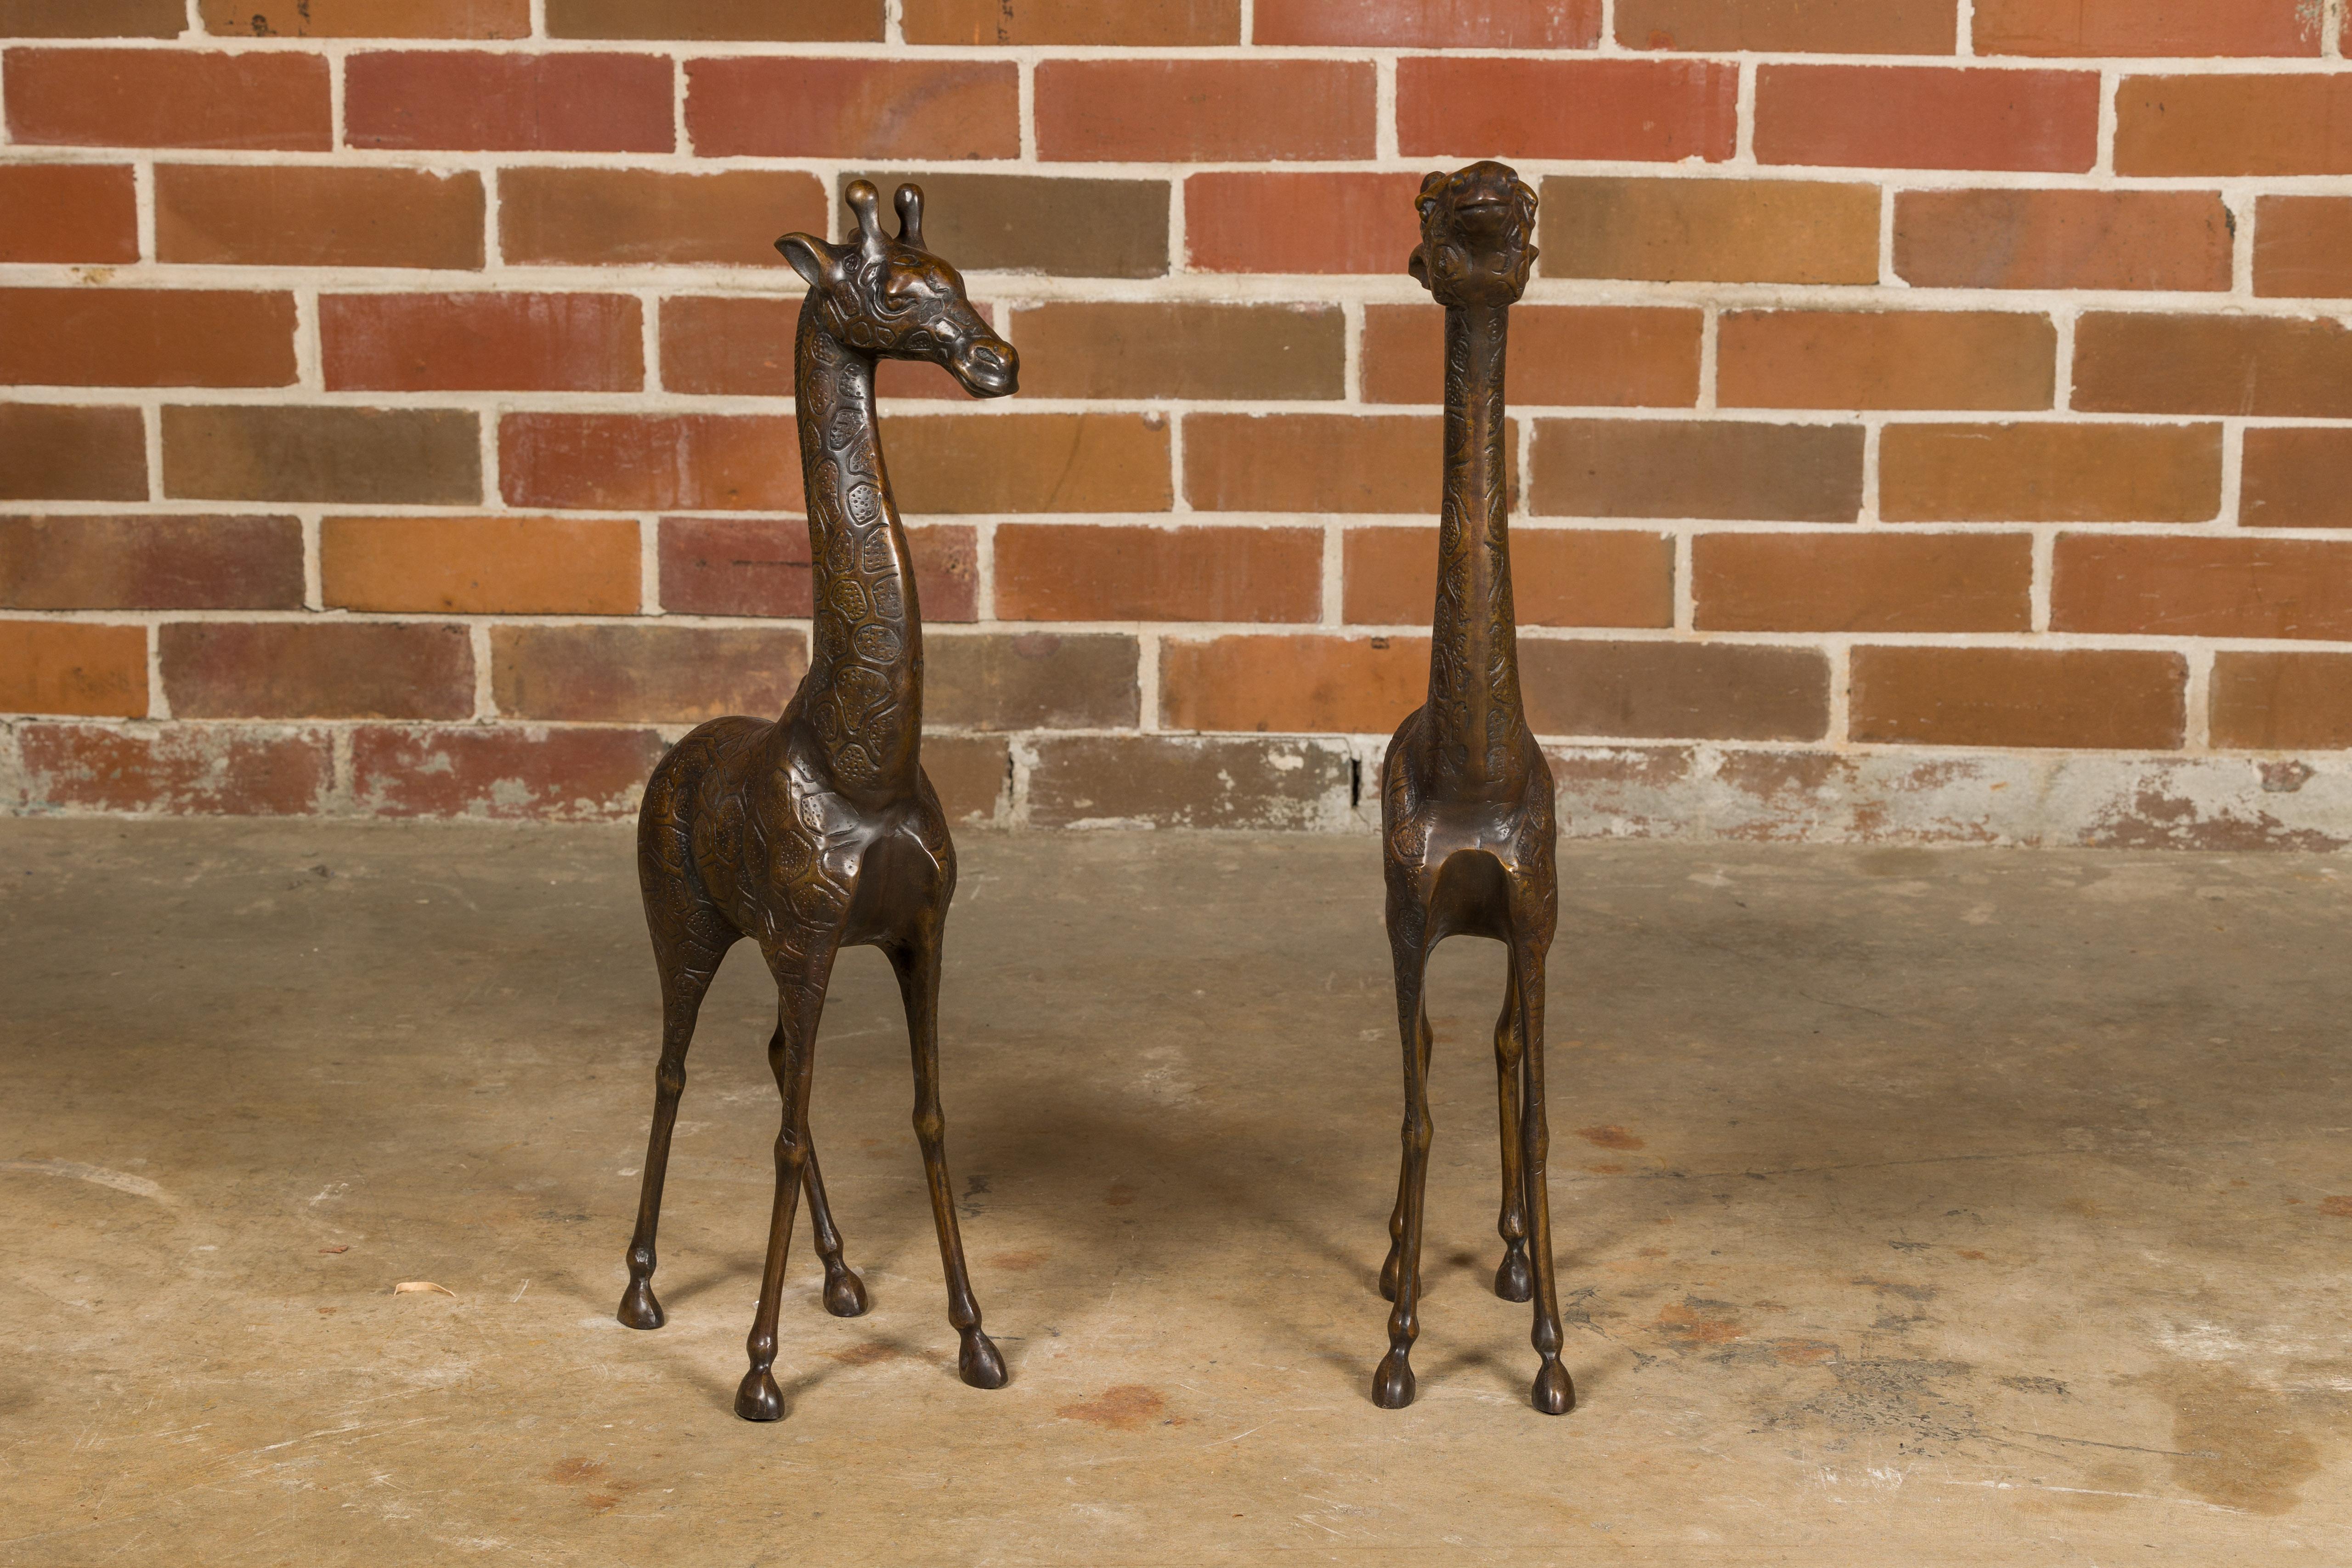 This charming pair of mid-20th-century American bronze giraffe sculptures exudes a playful and whimsical character, a delightful addition to any home. Though modest in size, they command presence with their artful depiction.

The sculptures capture